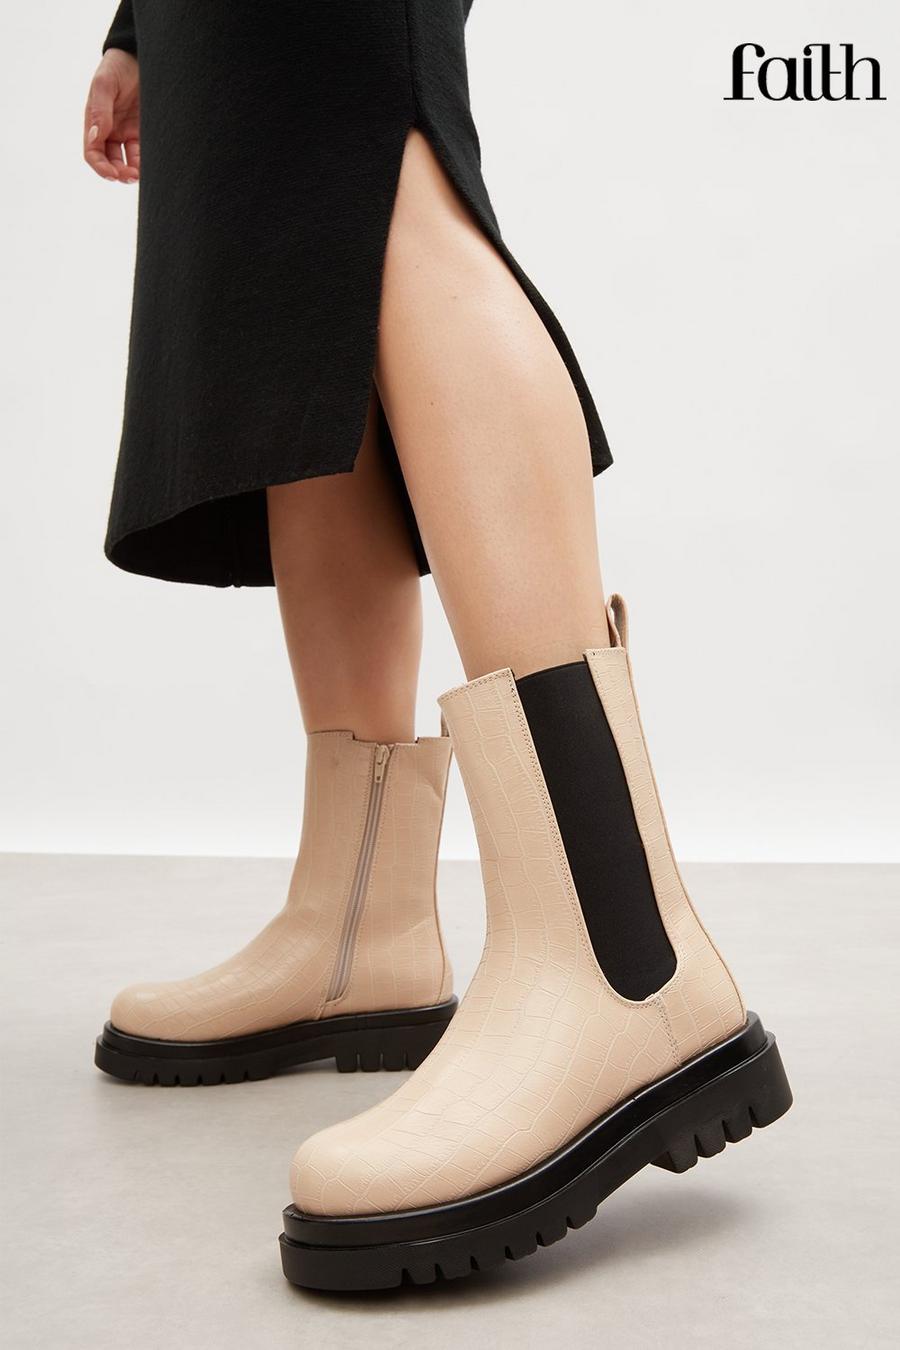 Faith: Nells Cleated Sole Chelsea Boot  